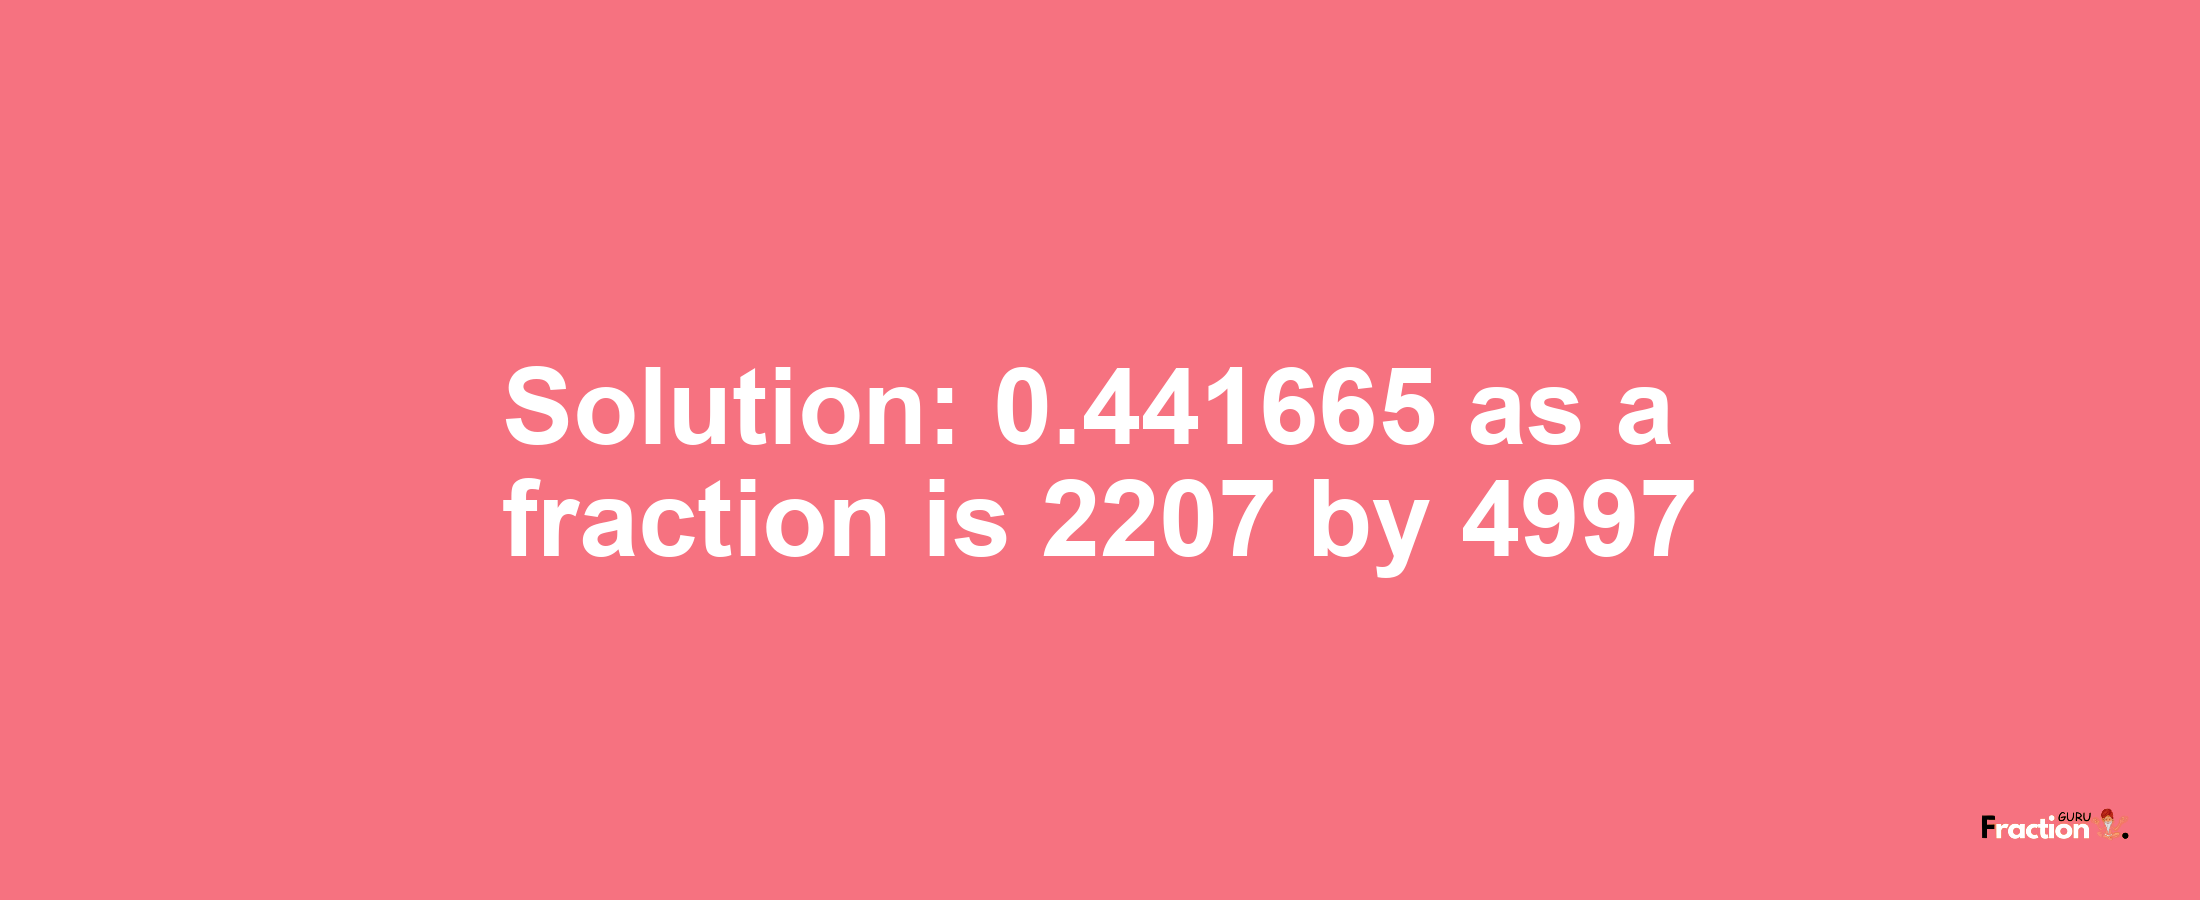 Solution:0.441665 as a fraction is 2207/4997